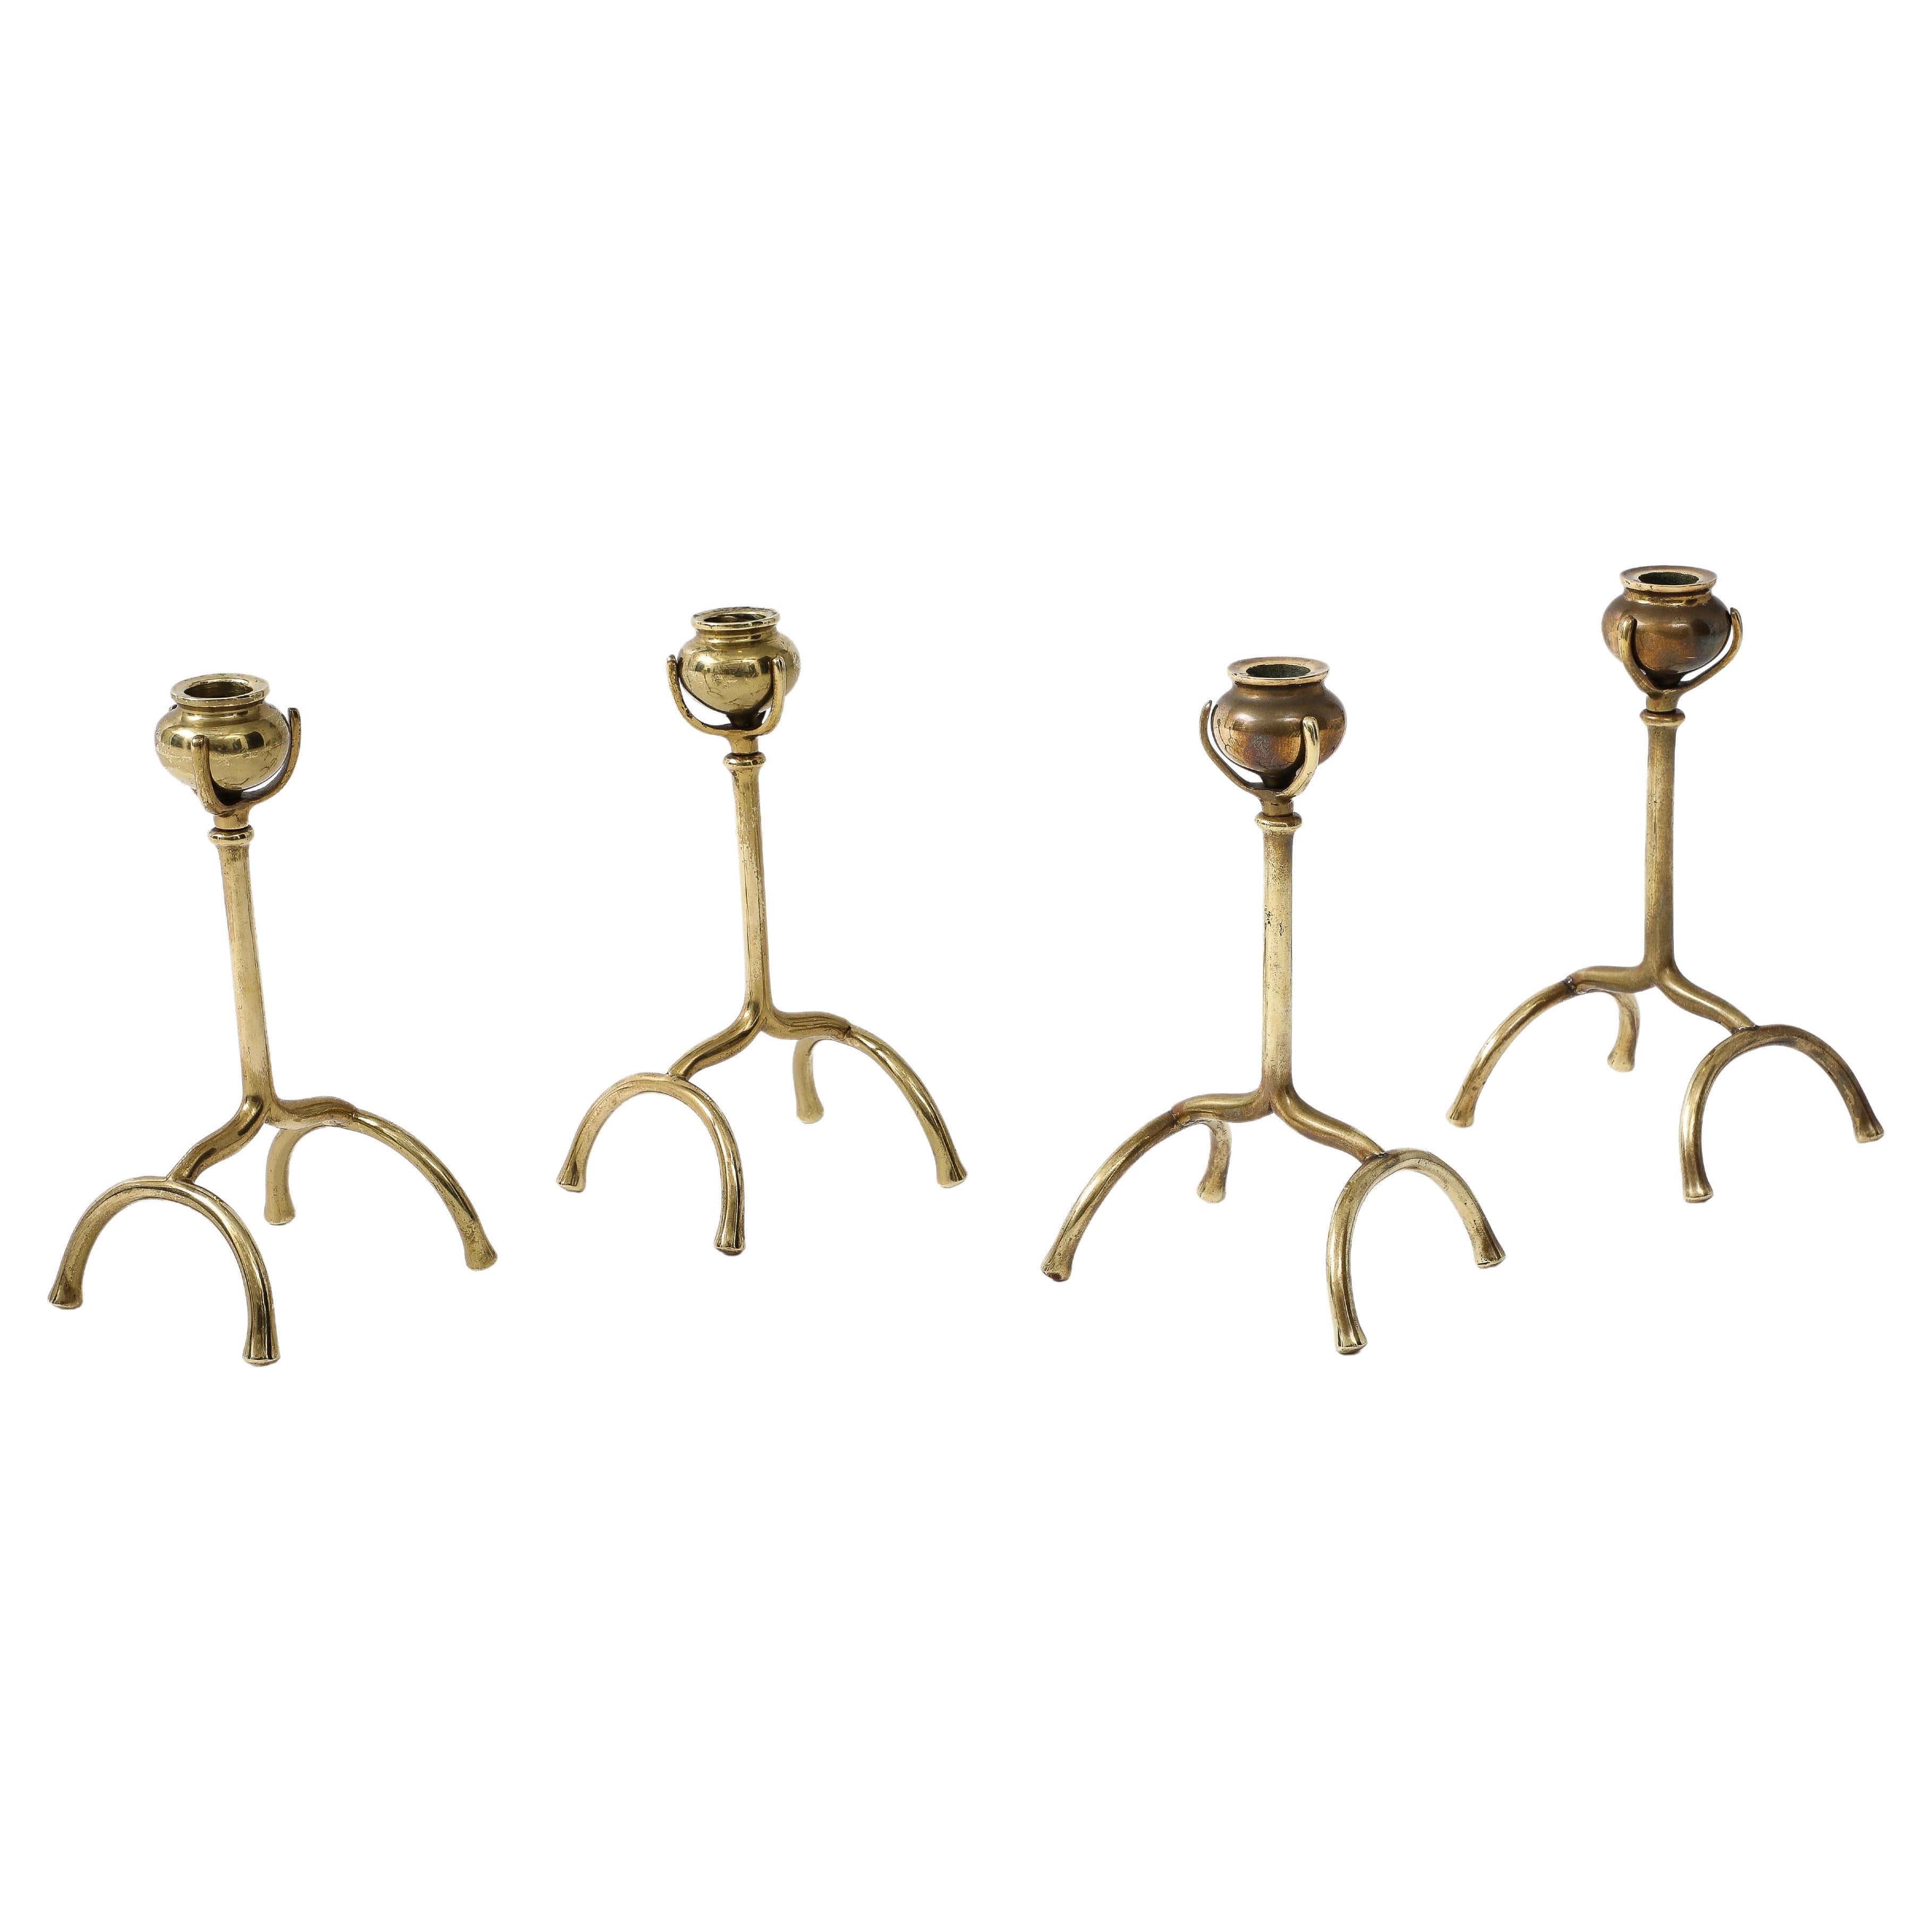 Tiffany Style Solid Brass Modern Candle Holders Set Of 4 For Sale